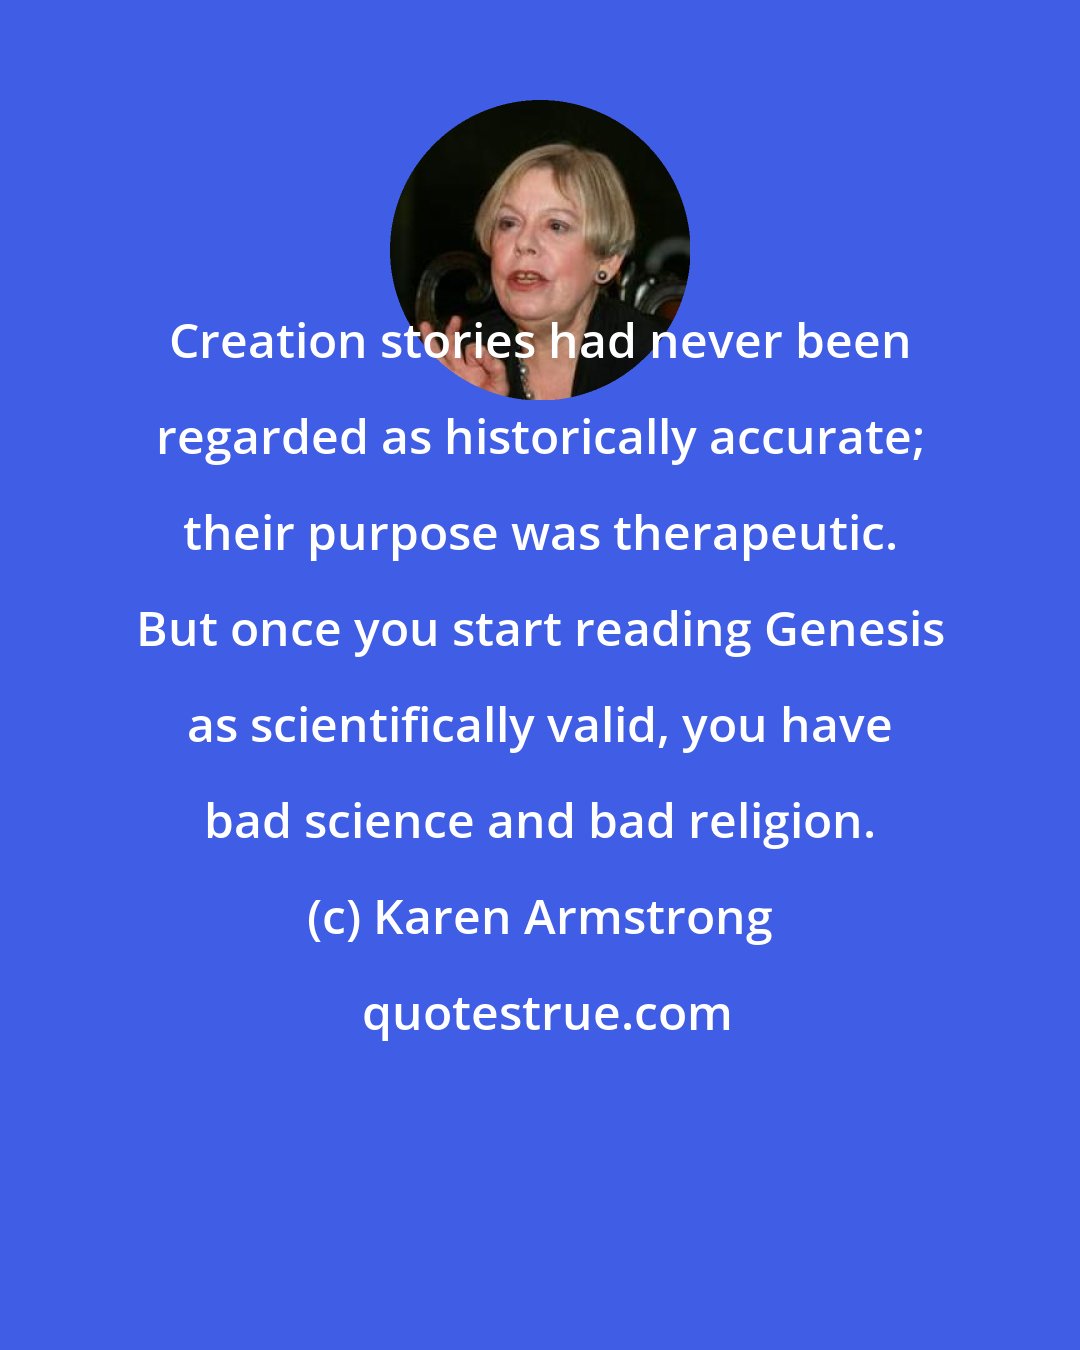 Karen Armstrong: Creation stories had never been regarded as historically accurate; their purpose was therapeutic. But once you start reading Genesis as scientifically valid, you have bad science and bad religion.